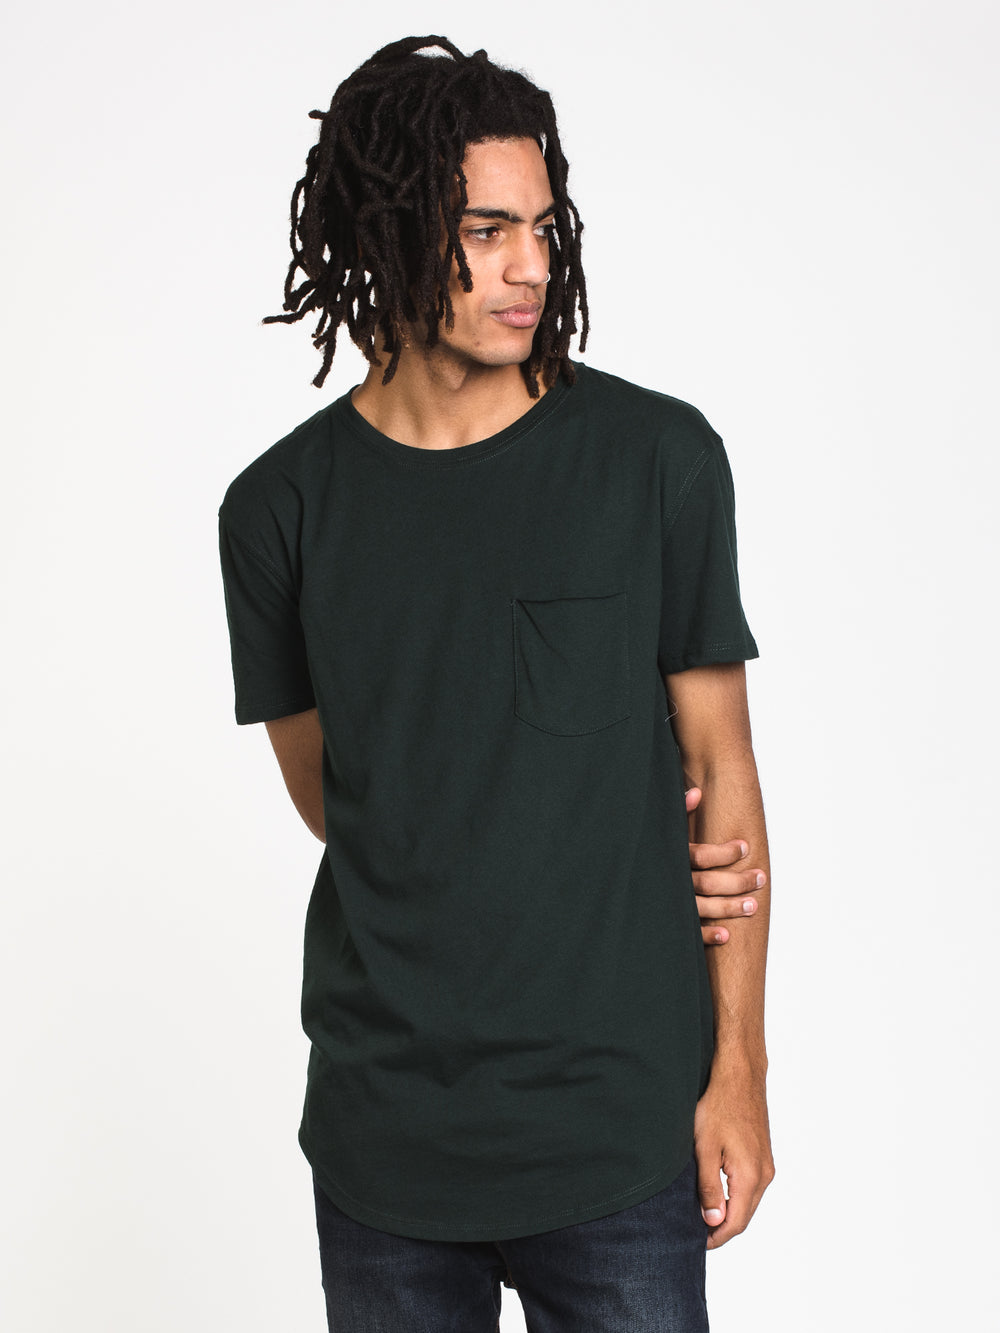 MENS LONGLINE T - FOREST - CLEARANCE